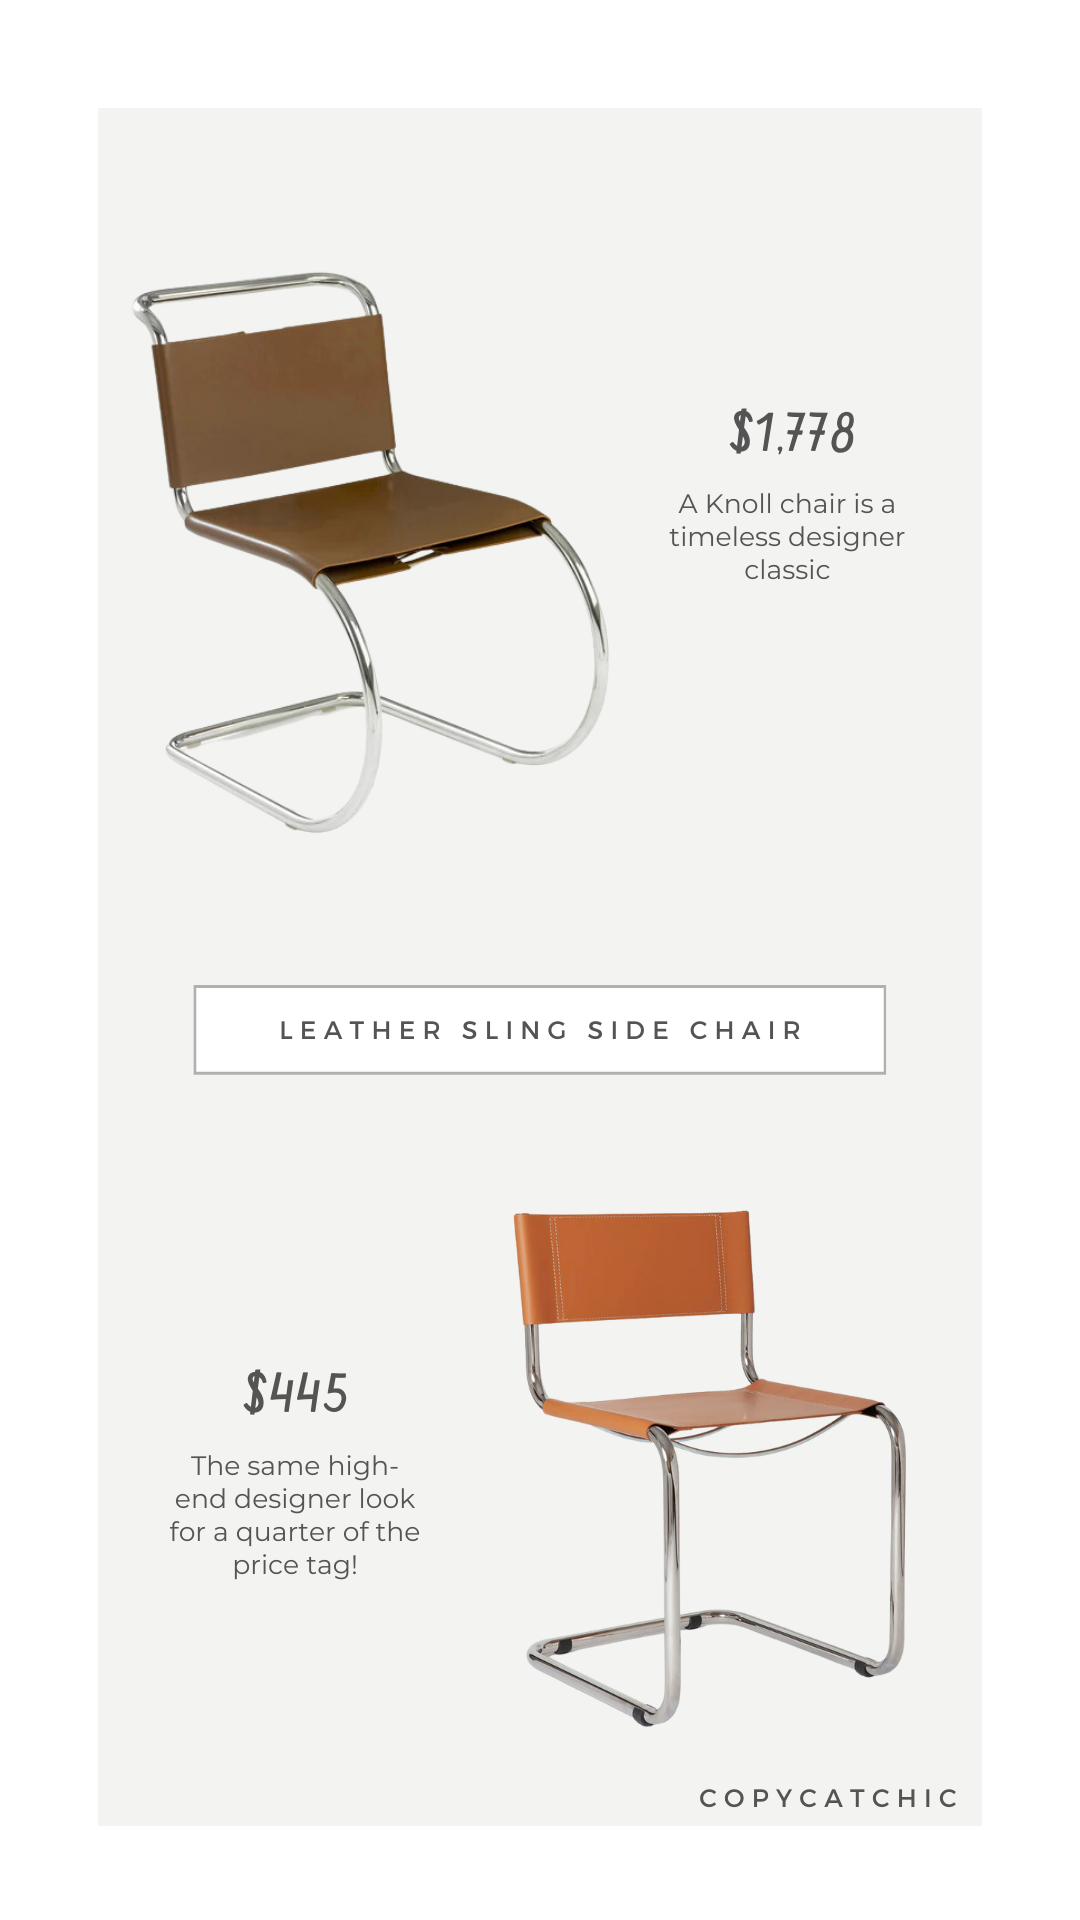 Look for Less: Leather Sling Side Chair, 2Modern Knoll MR Armless Side Chair vs Forom Stam Leather Side Chair, daily find, dupe, copycatchic luxe living for less, budget home decor and design, daily dupes, home trends, sales, budget travel and room inspiration